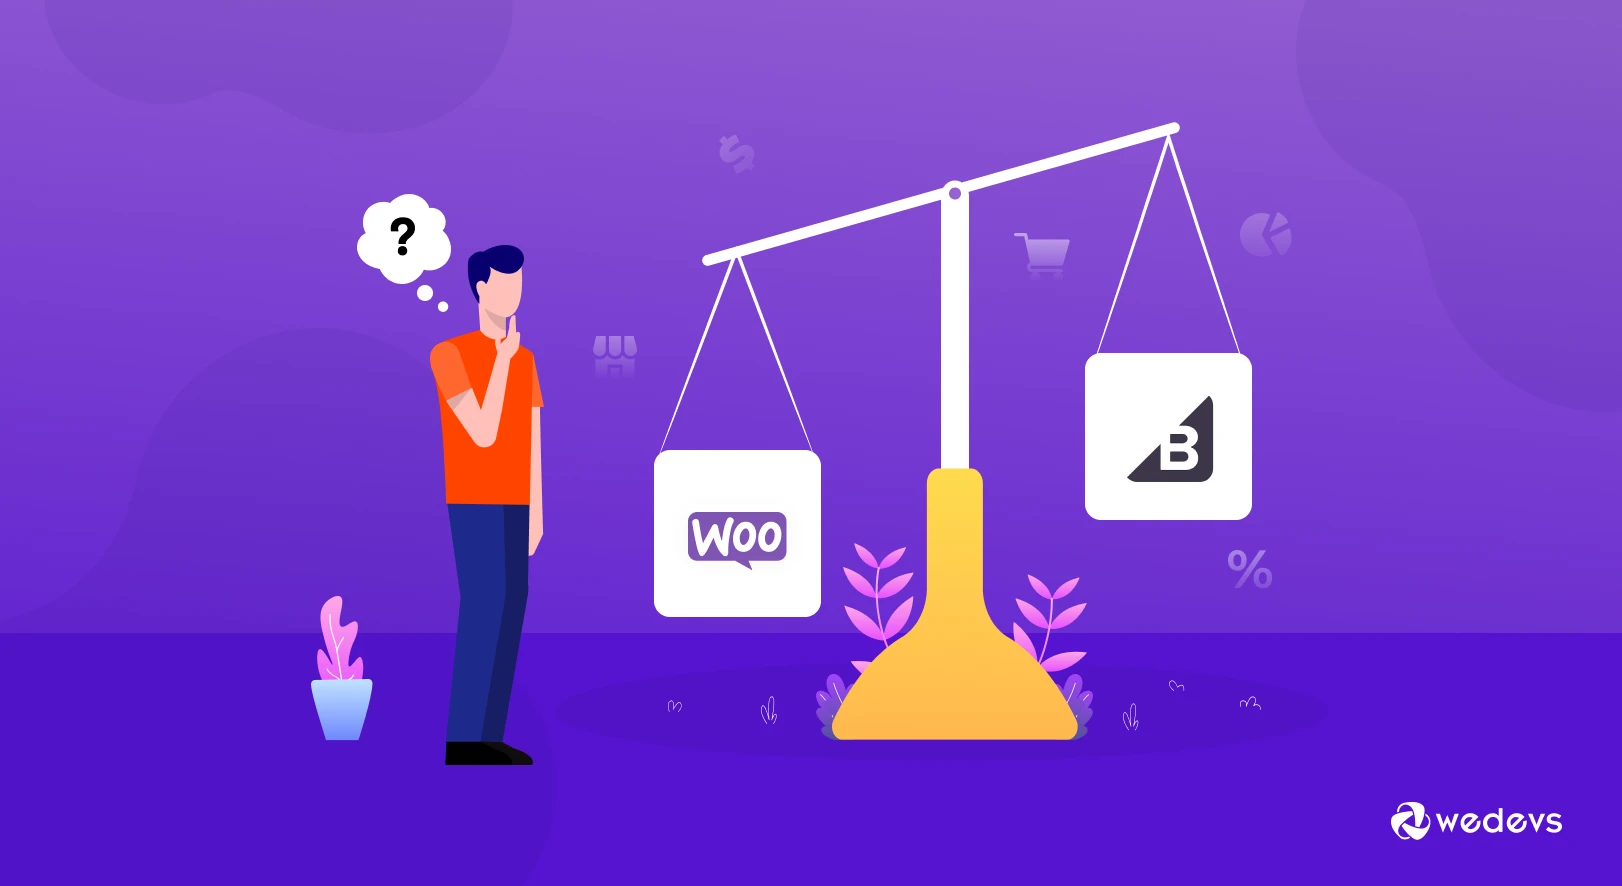 What Makes WooCommerce The Ideal BigCommerce Alternatives